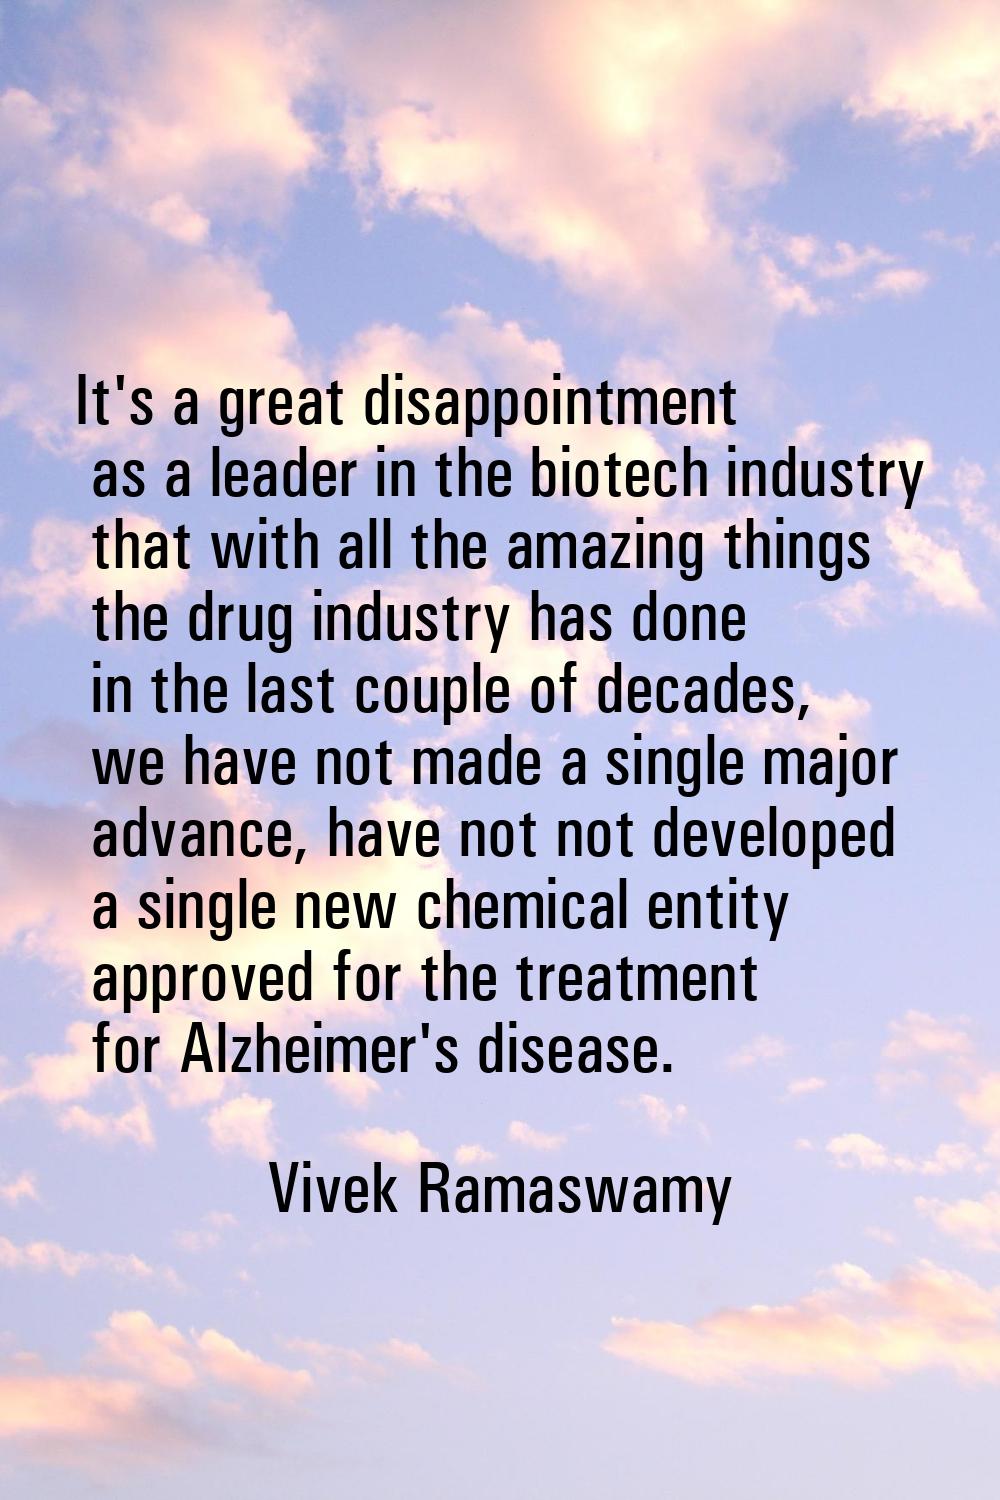 It's a great disappointment as a leader in the biotech industry that with all the amazing things th